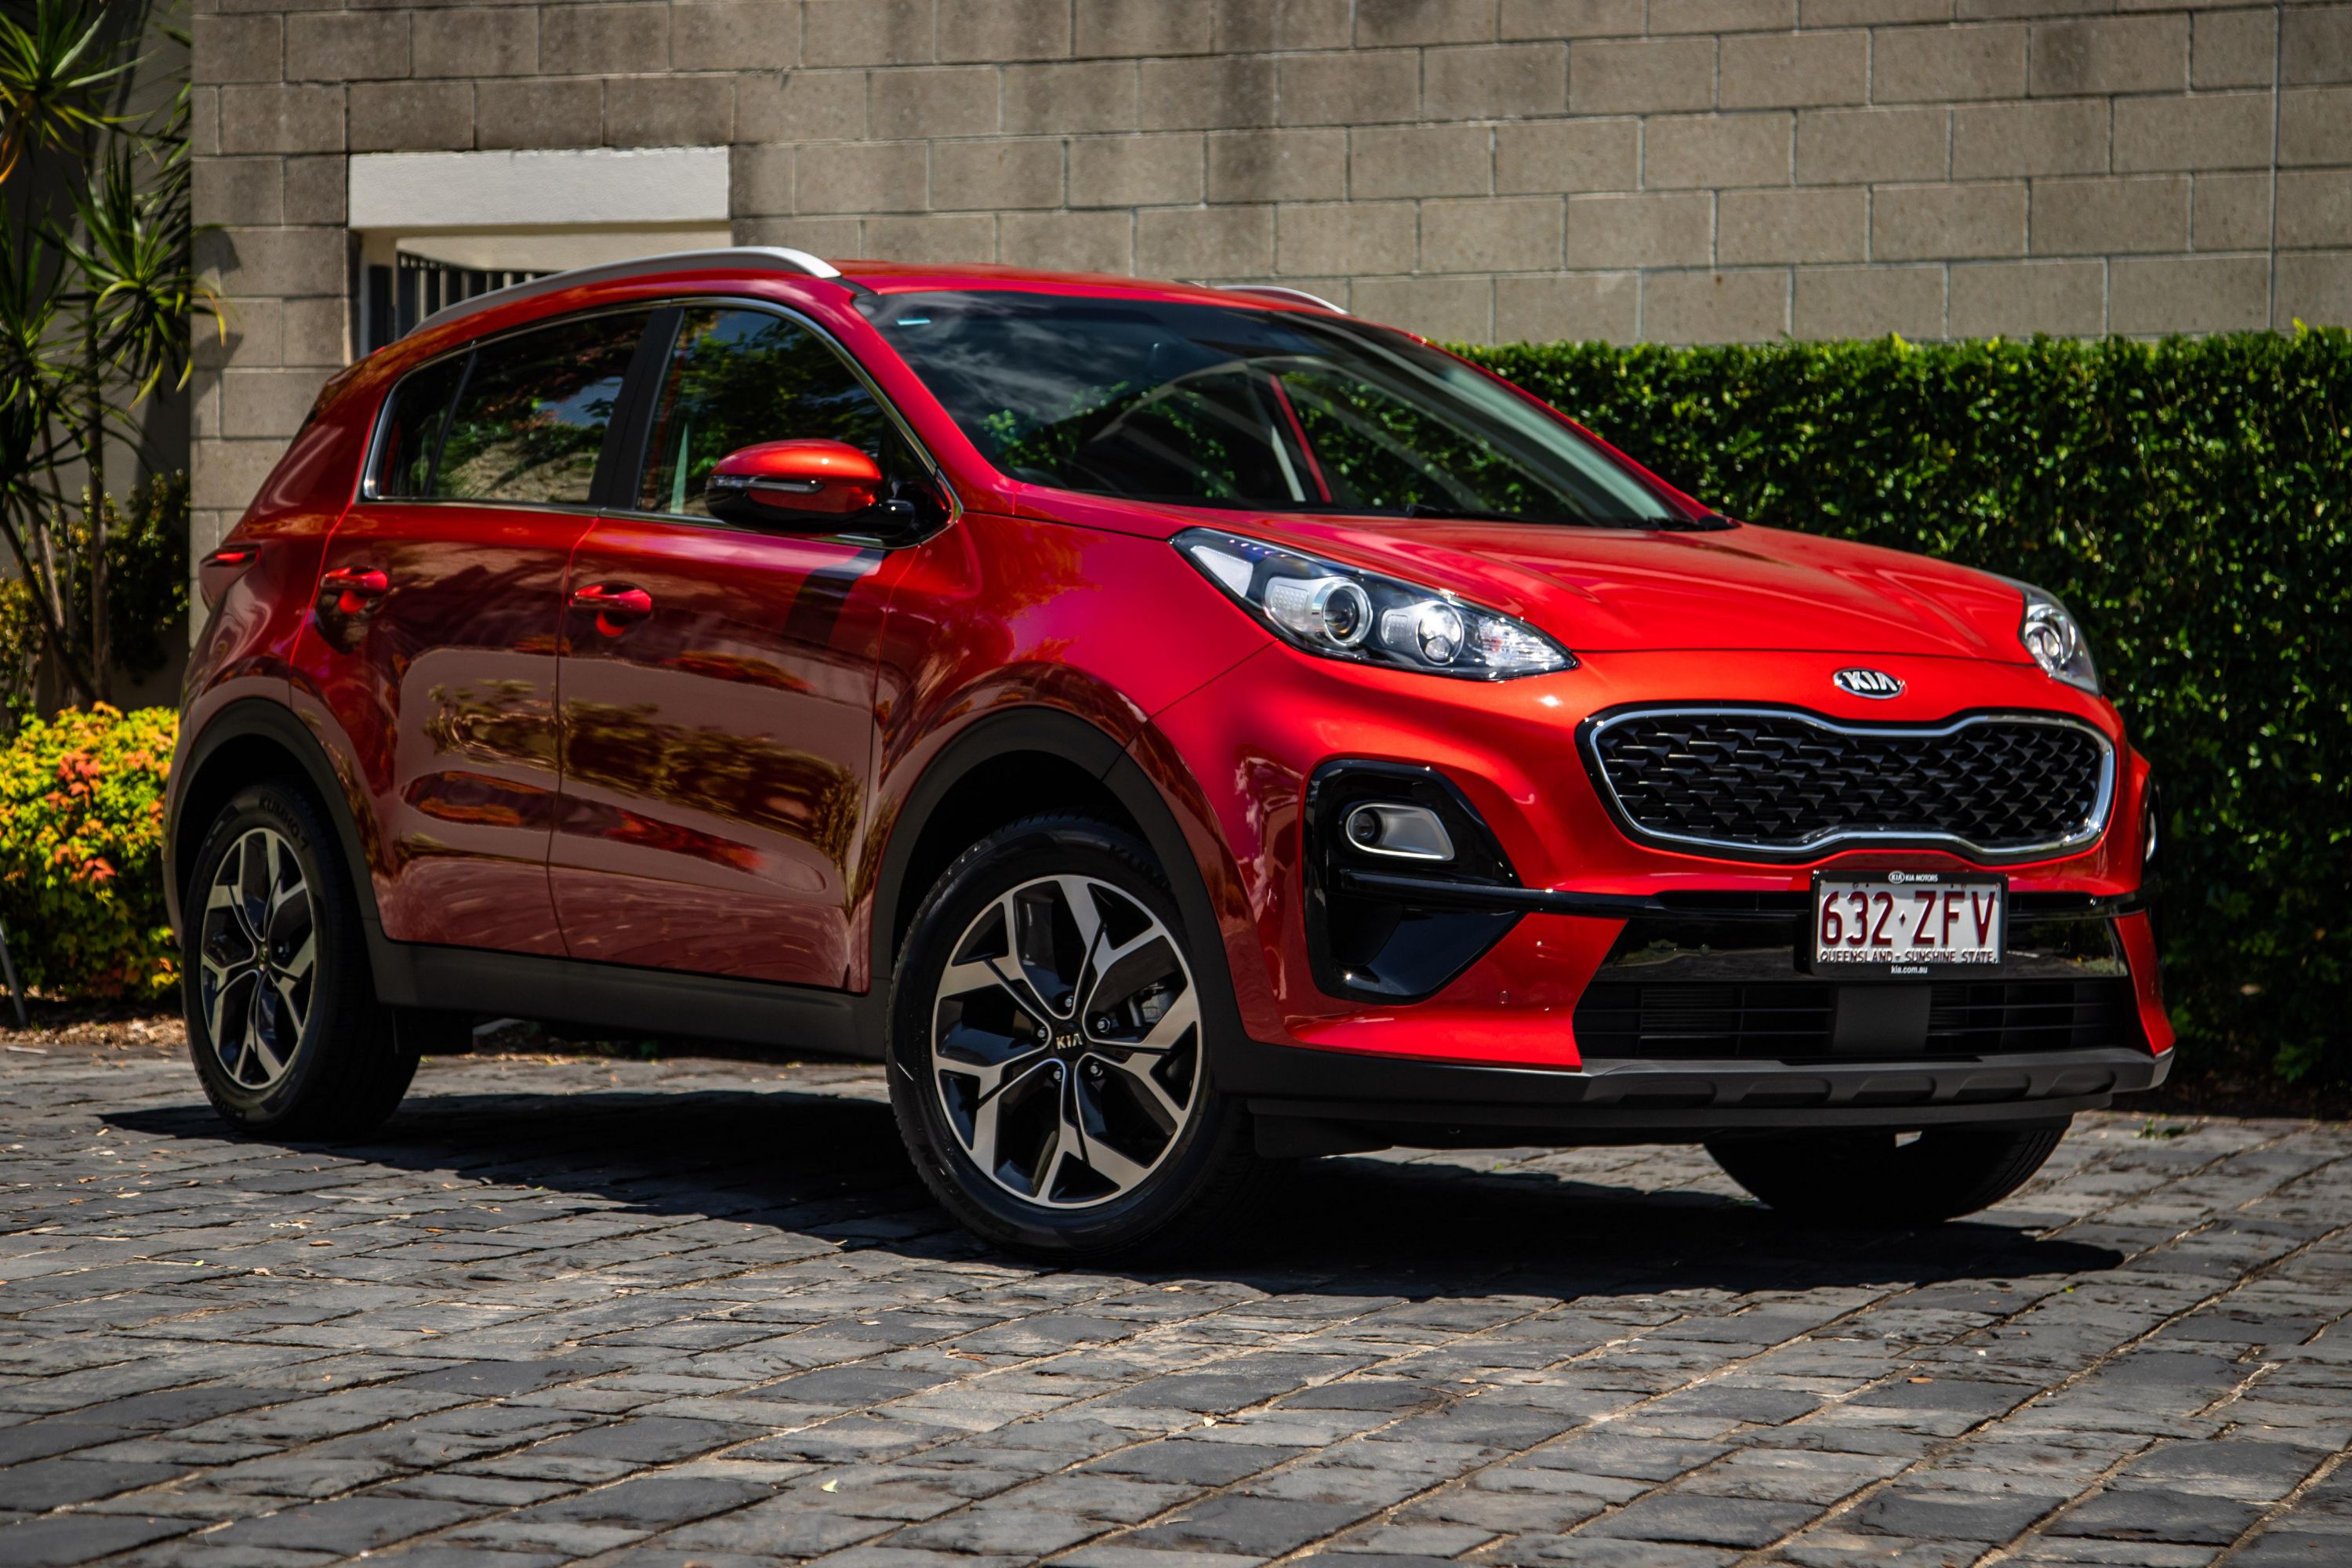 2022 Kia Sportage local launch timing confirmed CarExpert